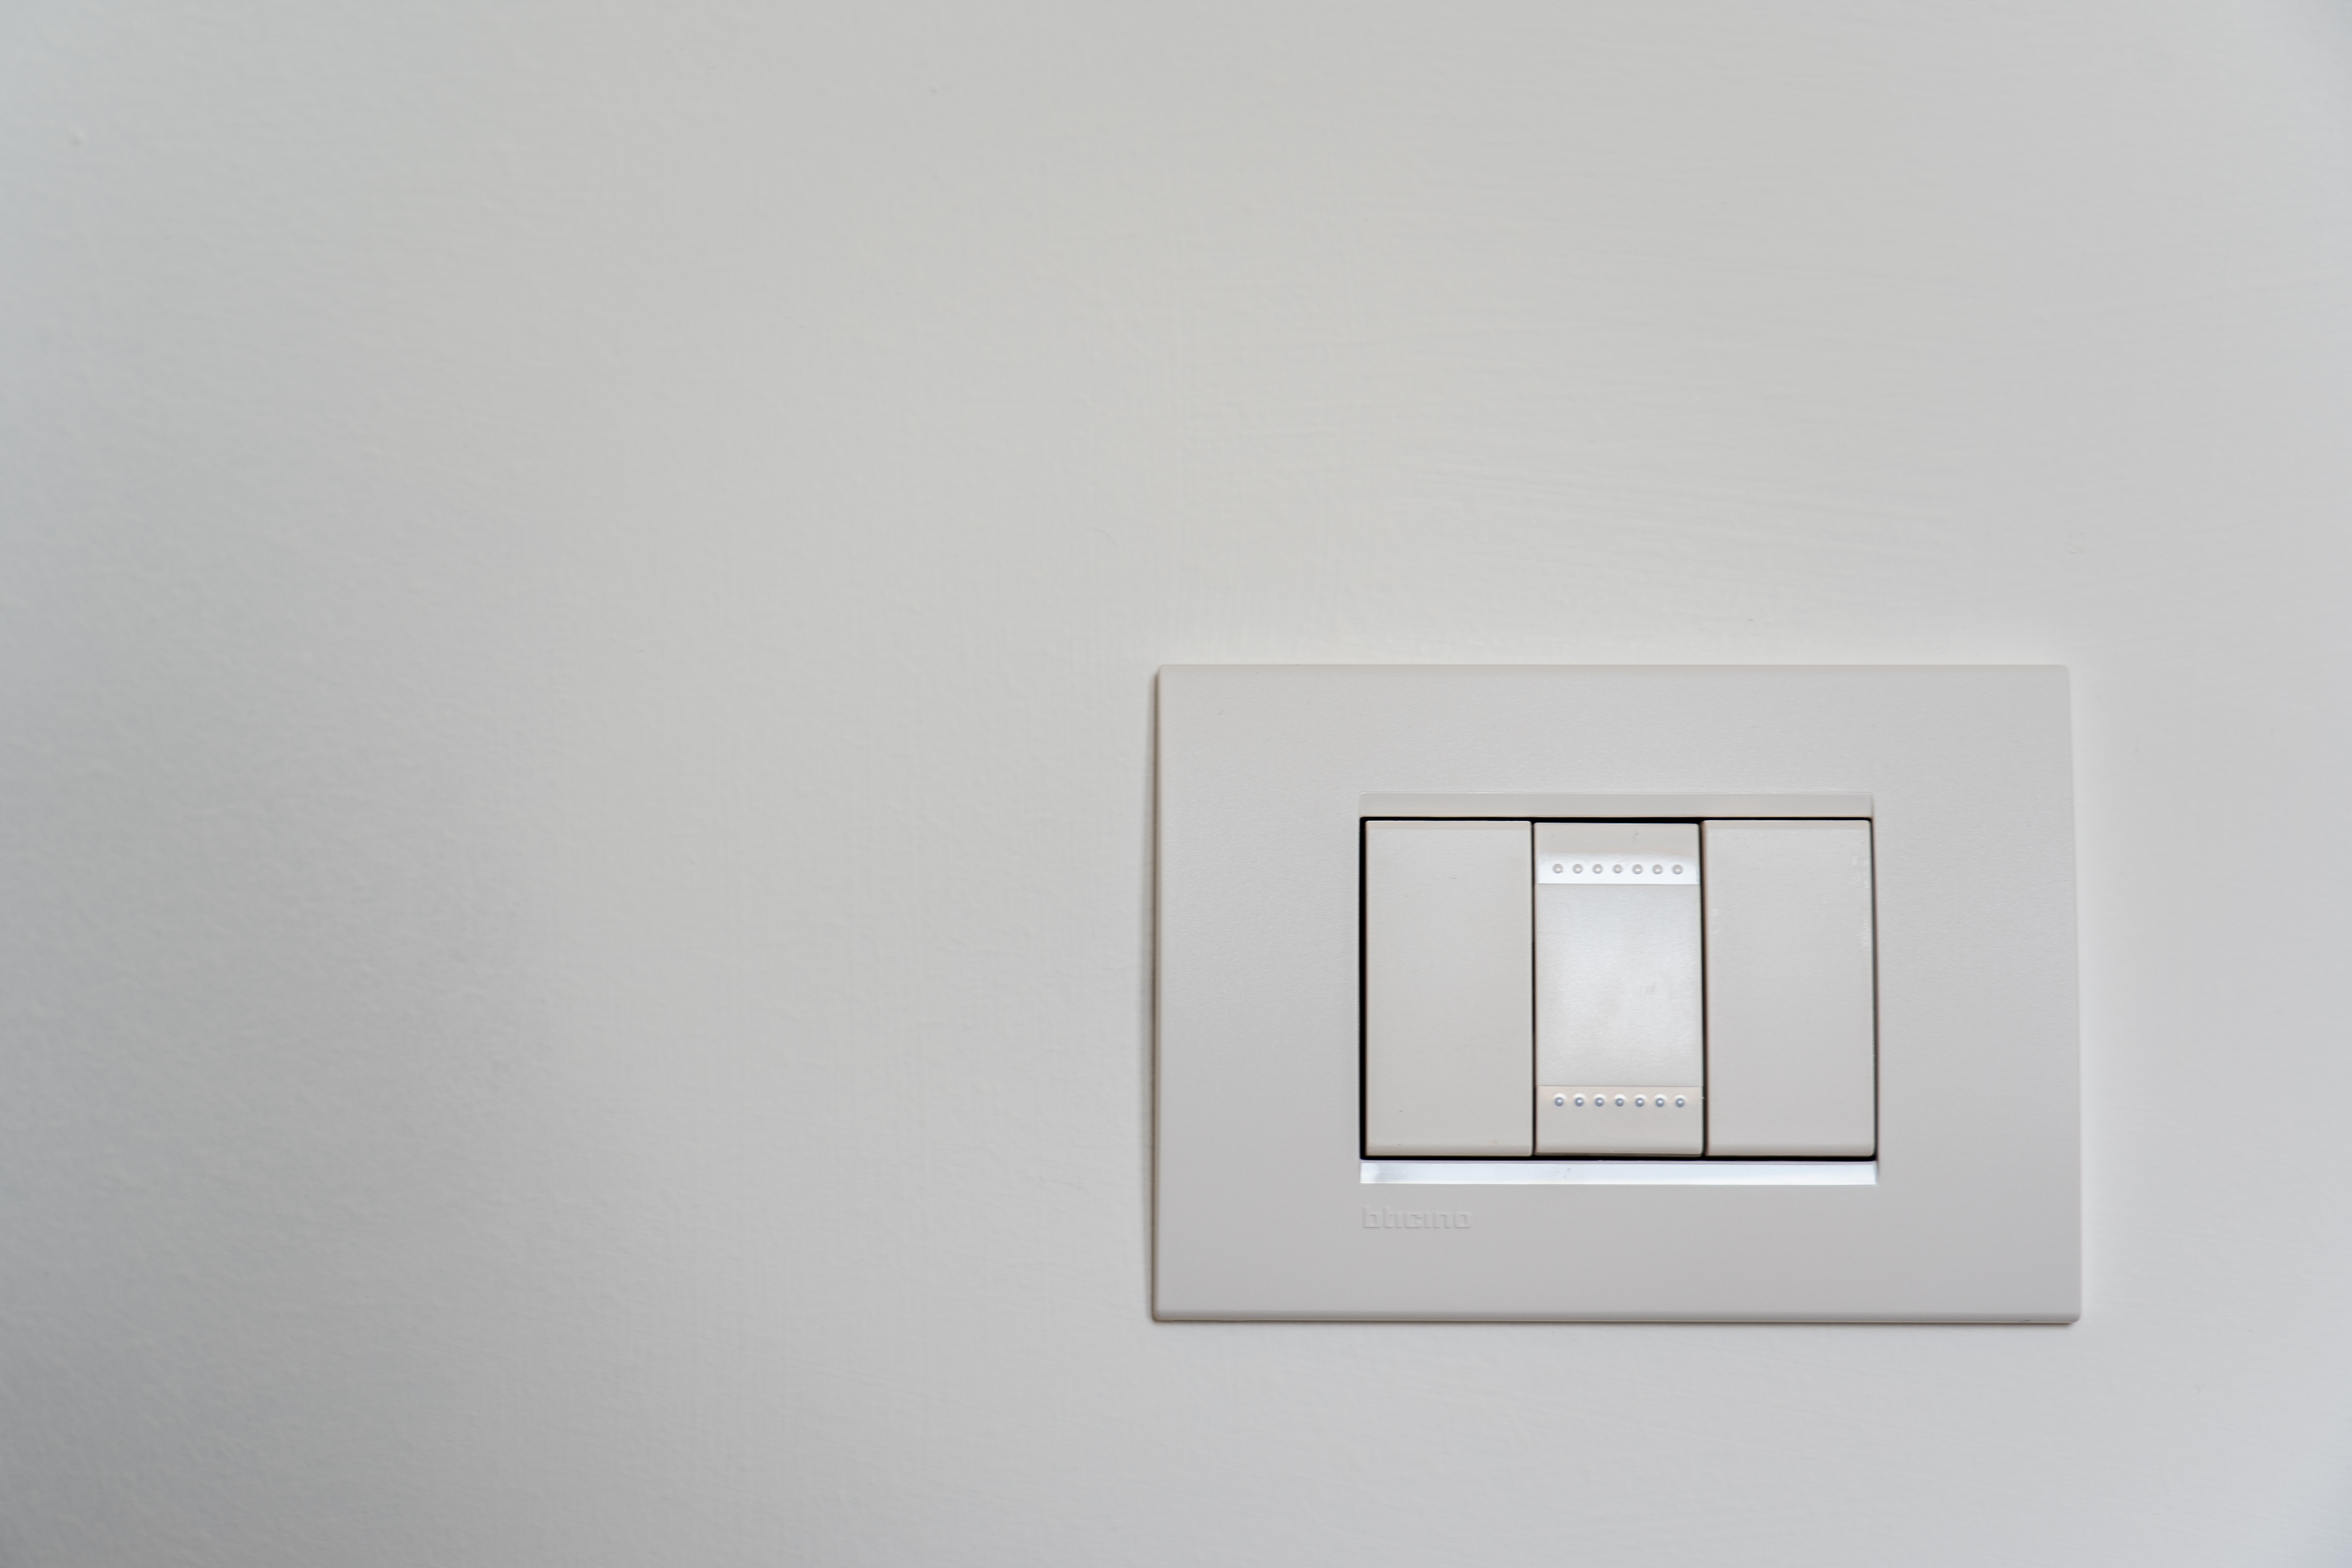 A light switch and sensor are mounted to a white wall.